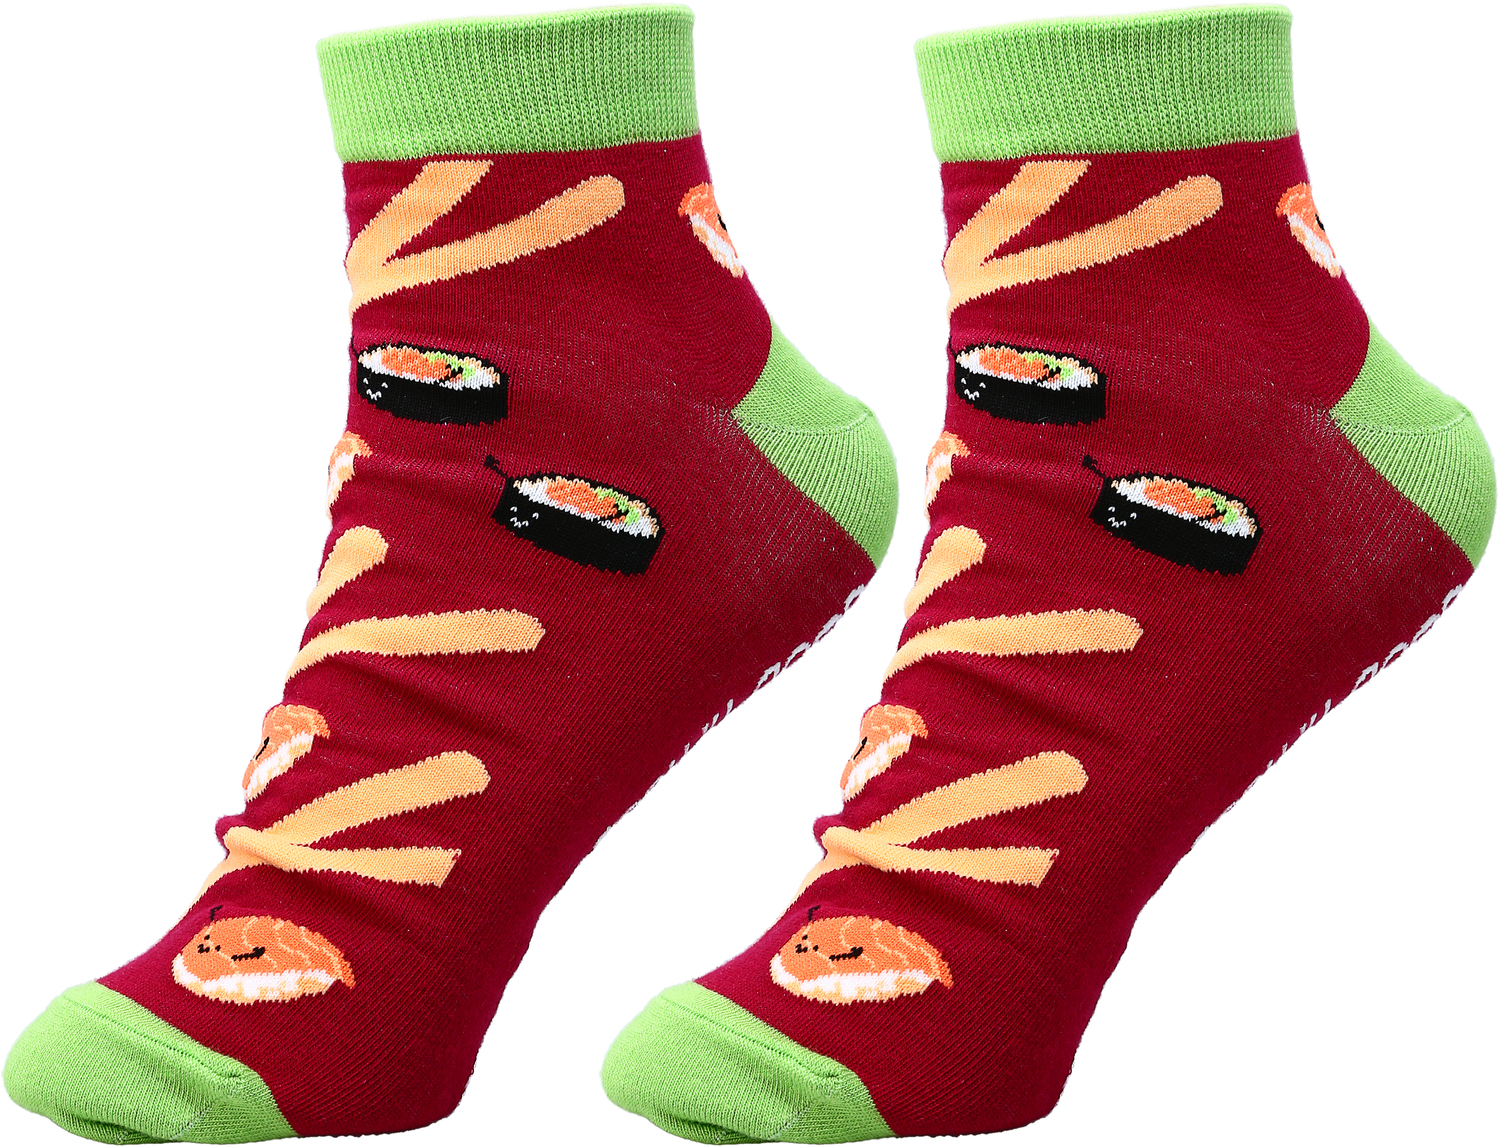 Sushi by Late Night Snacks - Sushi - Cotton Blend Ankle Socks